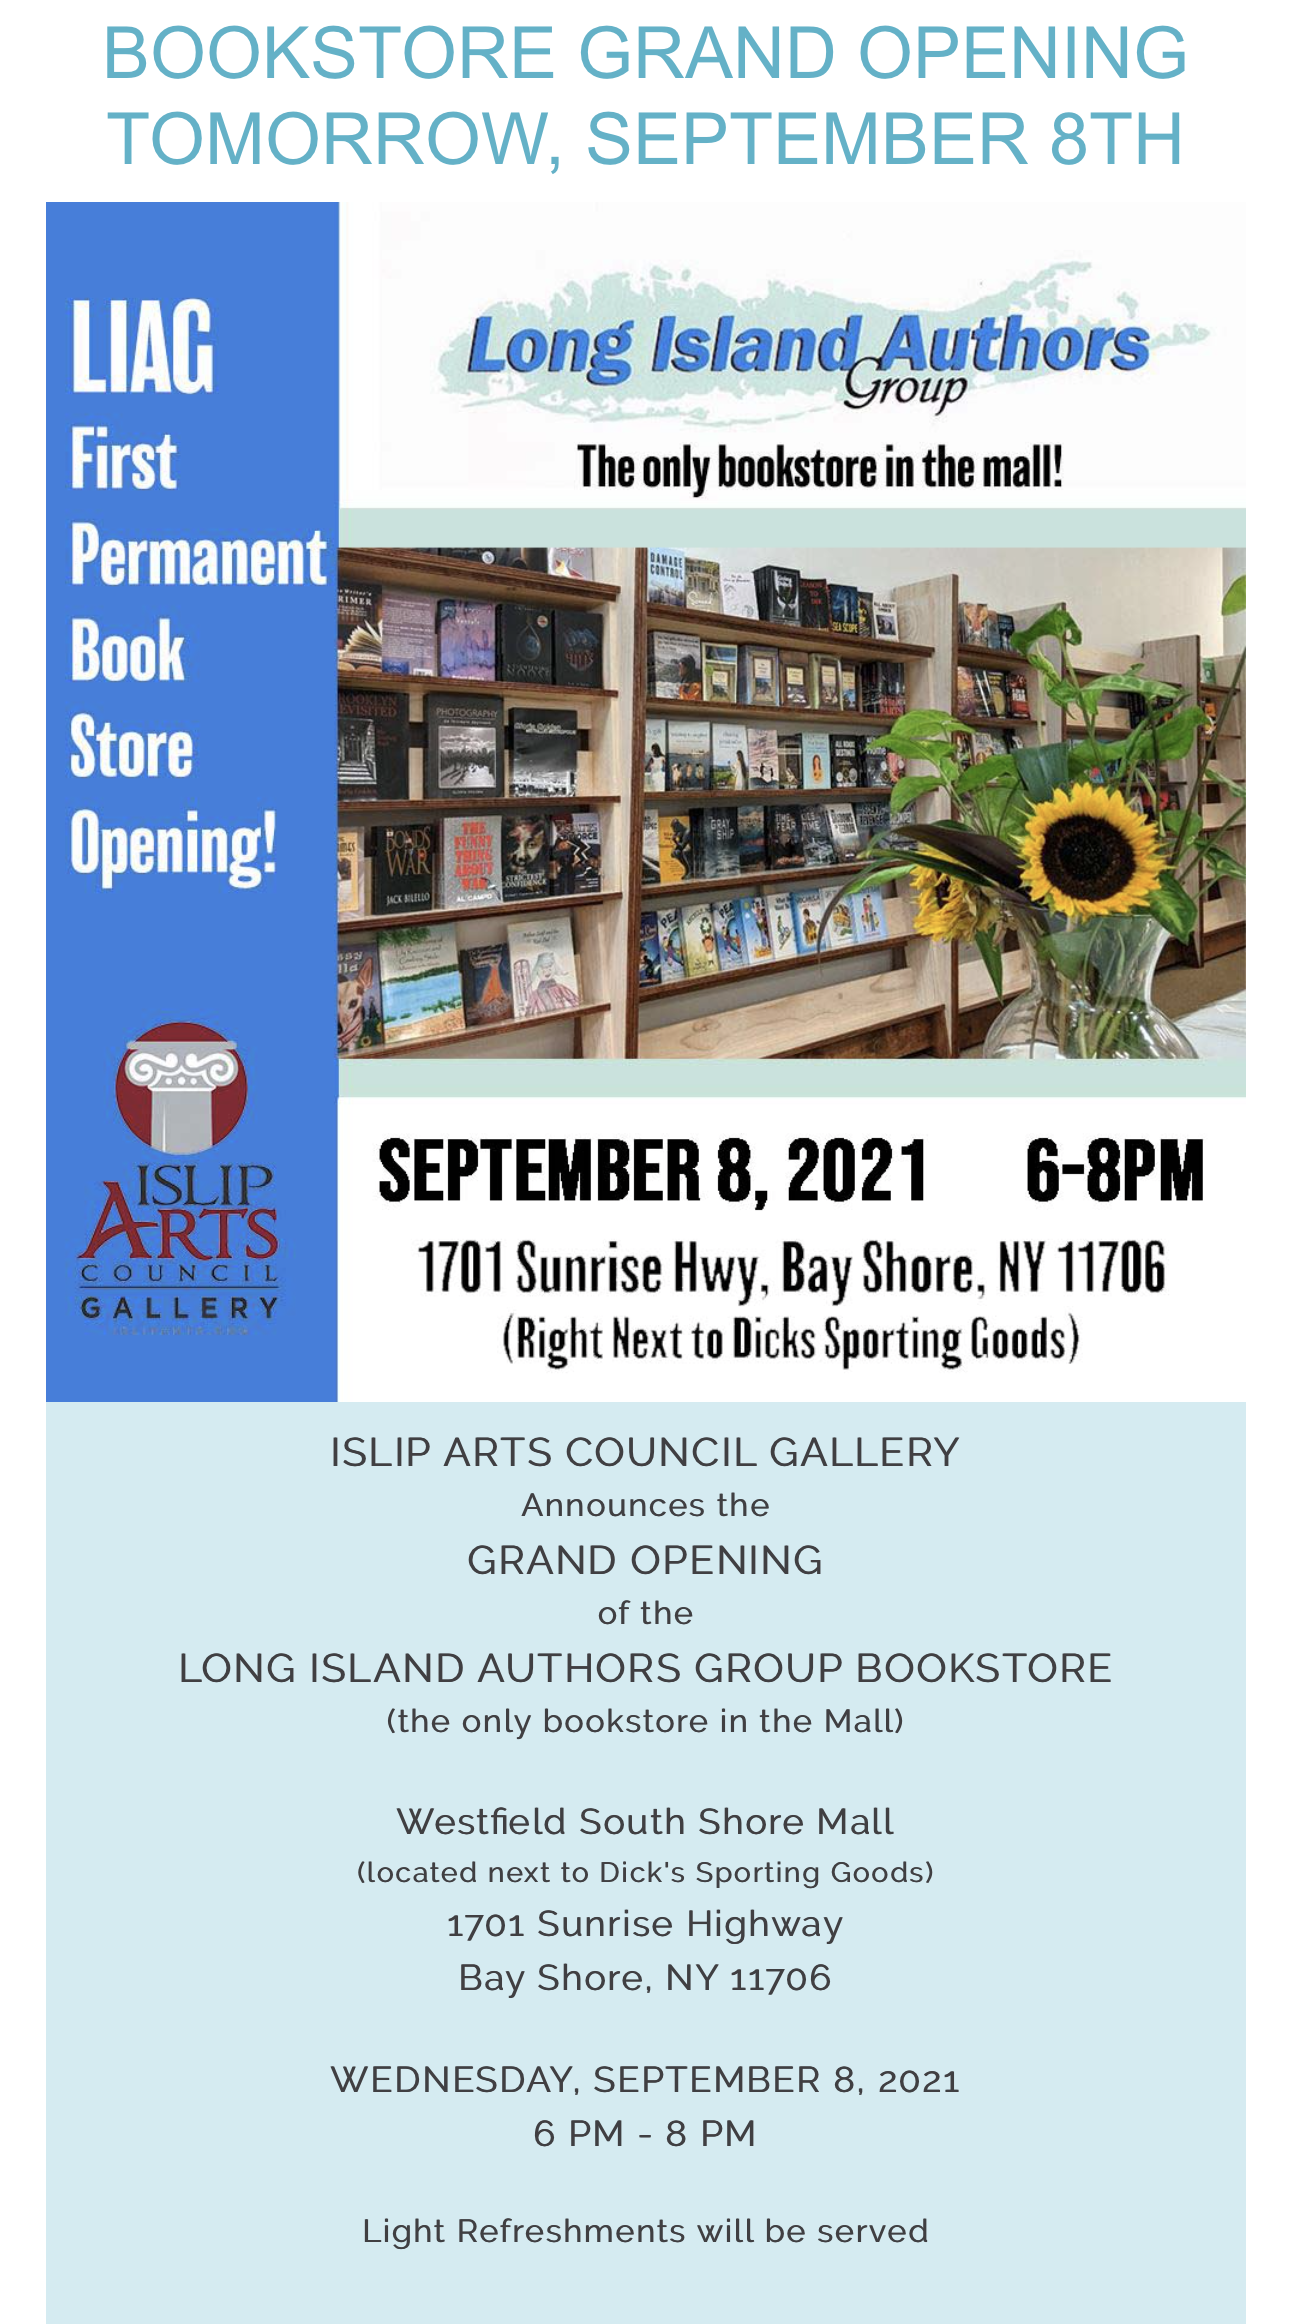 SEPT 2021 / Grand Opening of LI Authors Group Book Store at IAC Gallery